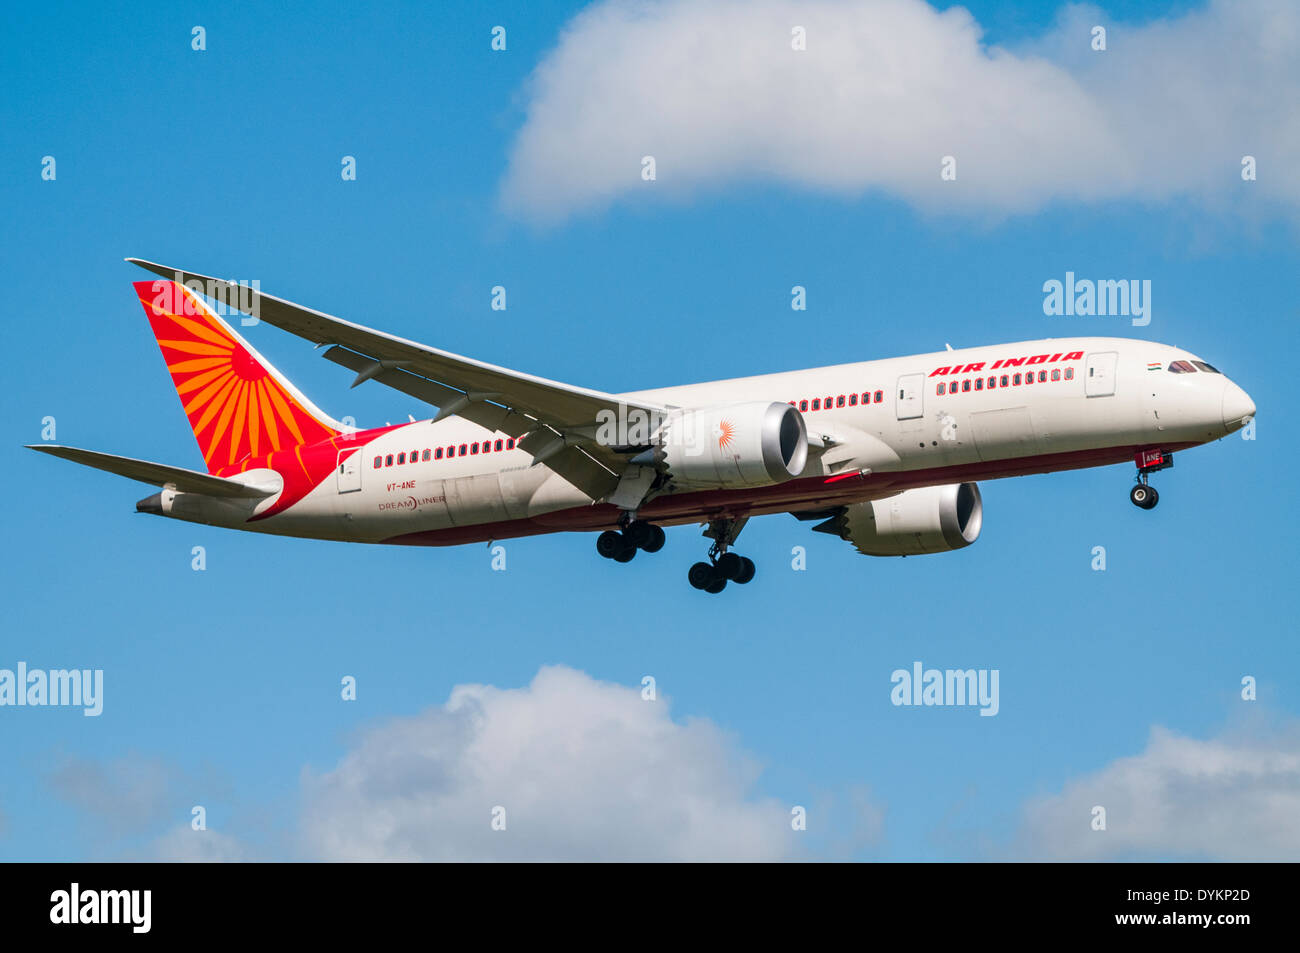 Side view of an Air India Boeing 787 Dreamliner aircraft on approach to land with landing gear down Stock Photo